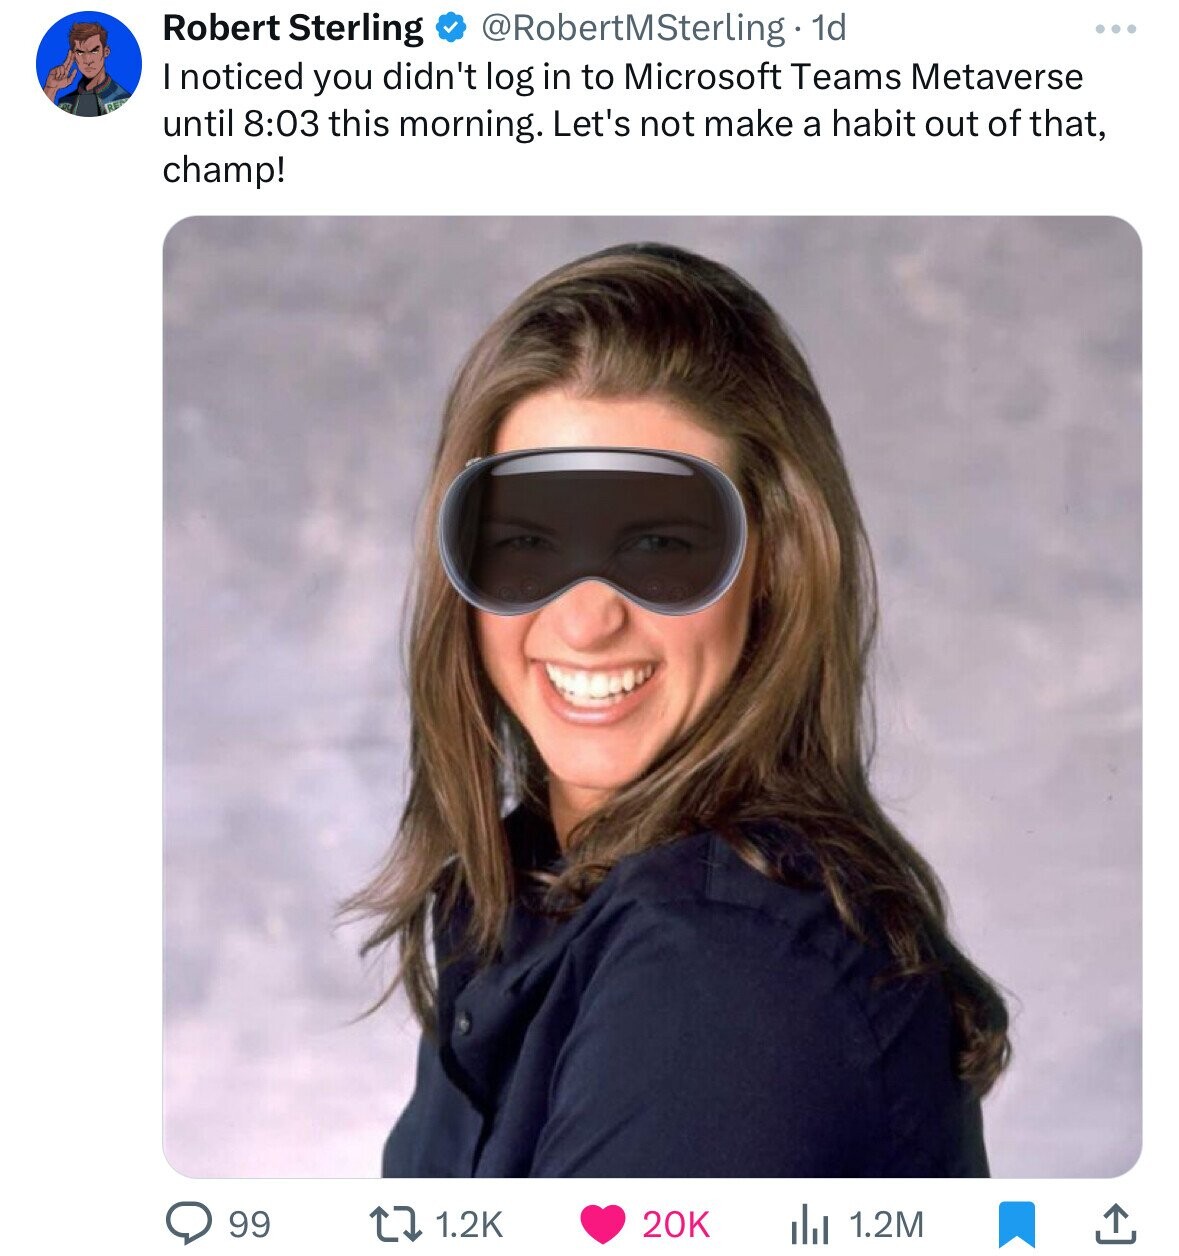 stephanie mcmahon meme - Robert Sterling . 1d I noticed you didn't log in to Microsoft Teams Metaverse until this morning. Let's not make a habit out of that, champ! 99 20K il 1.2M